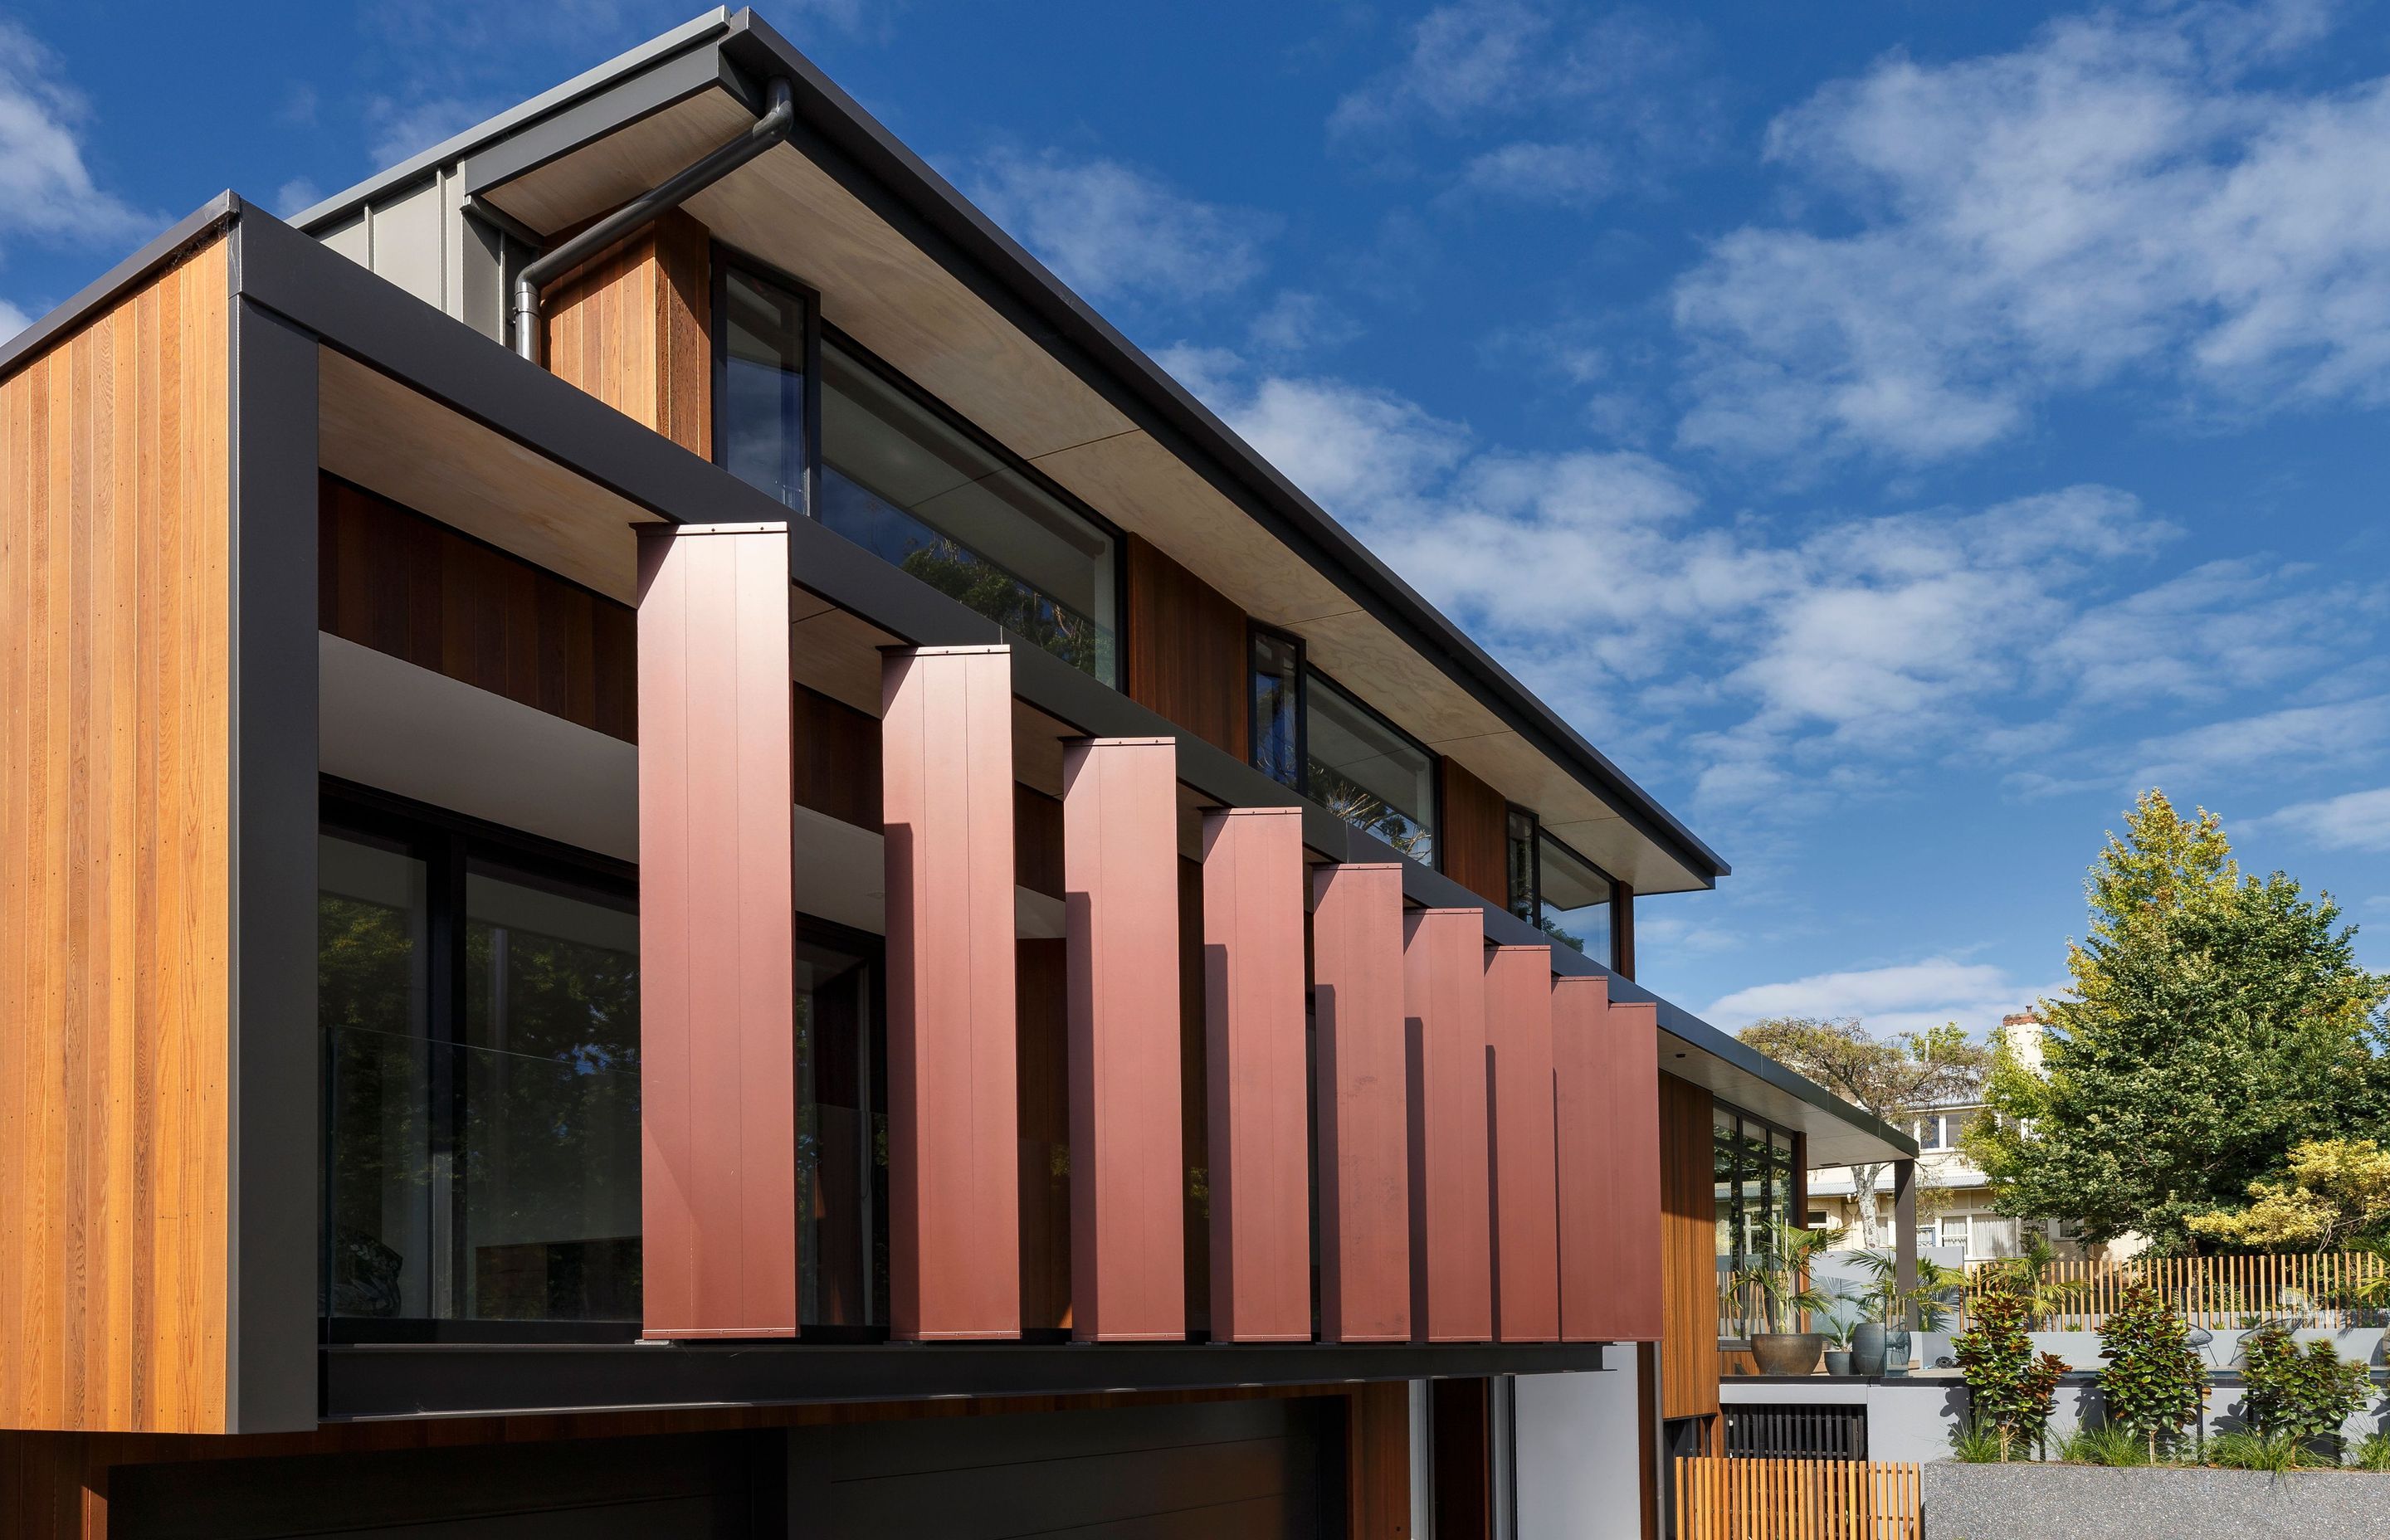 The exterior view of the front fins, painted in liquid copper to complement the warm tones of the cedar cladding.